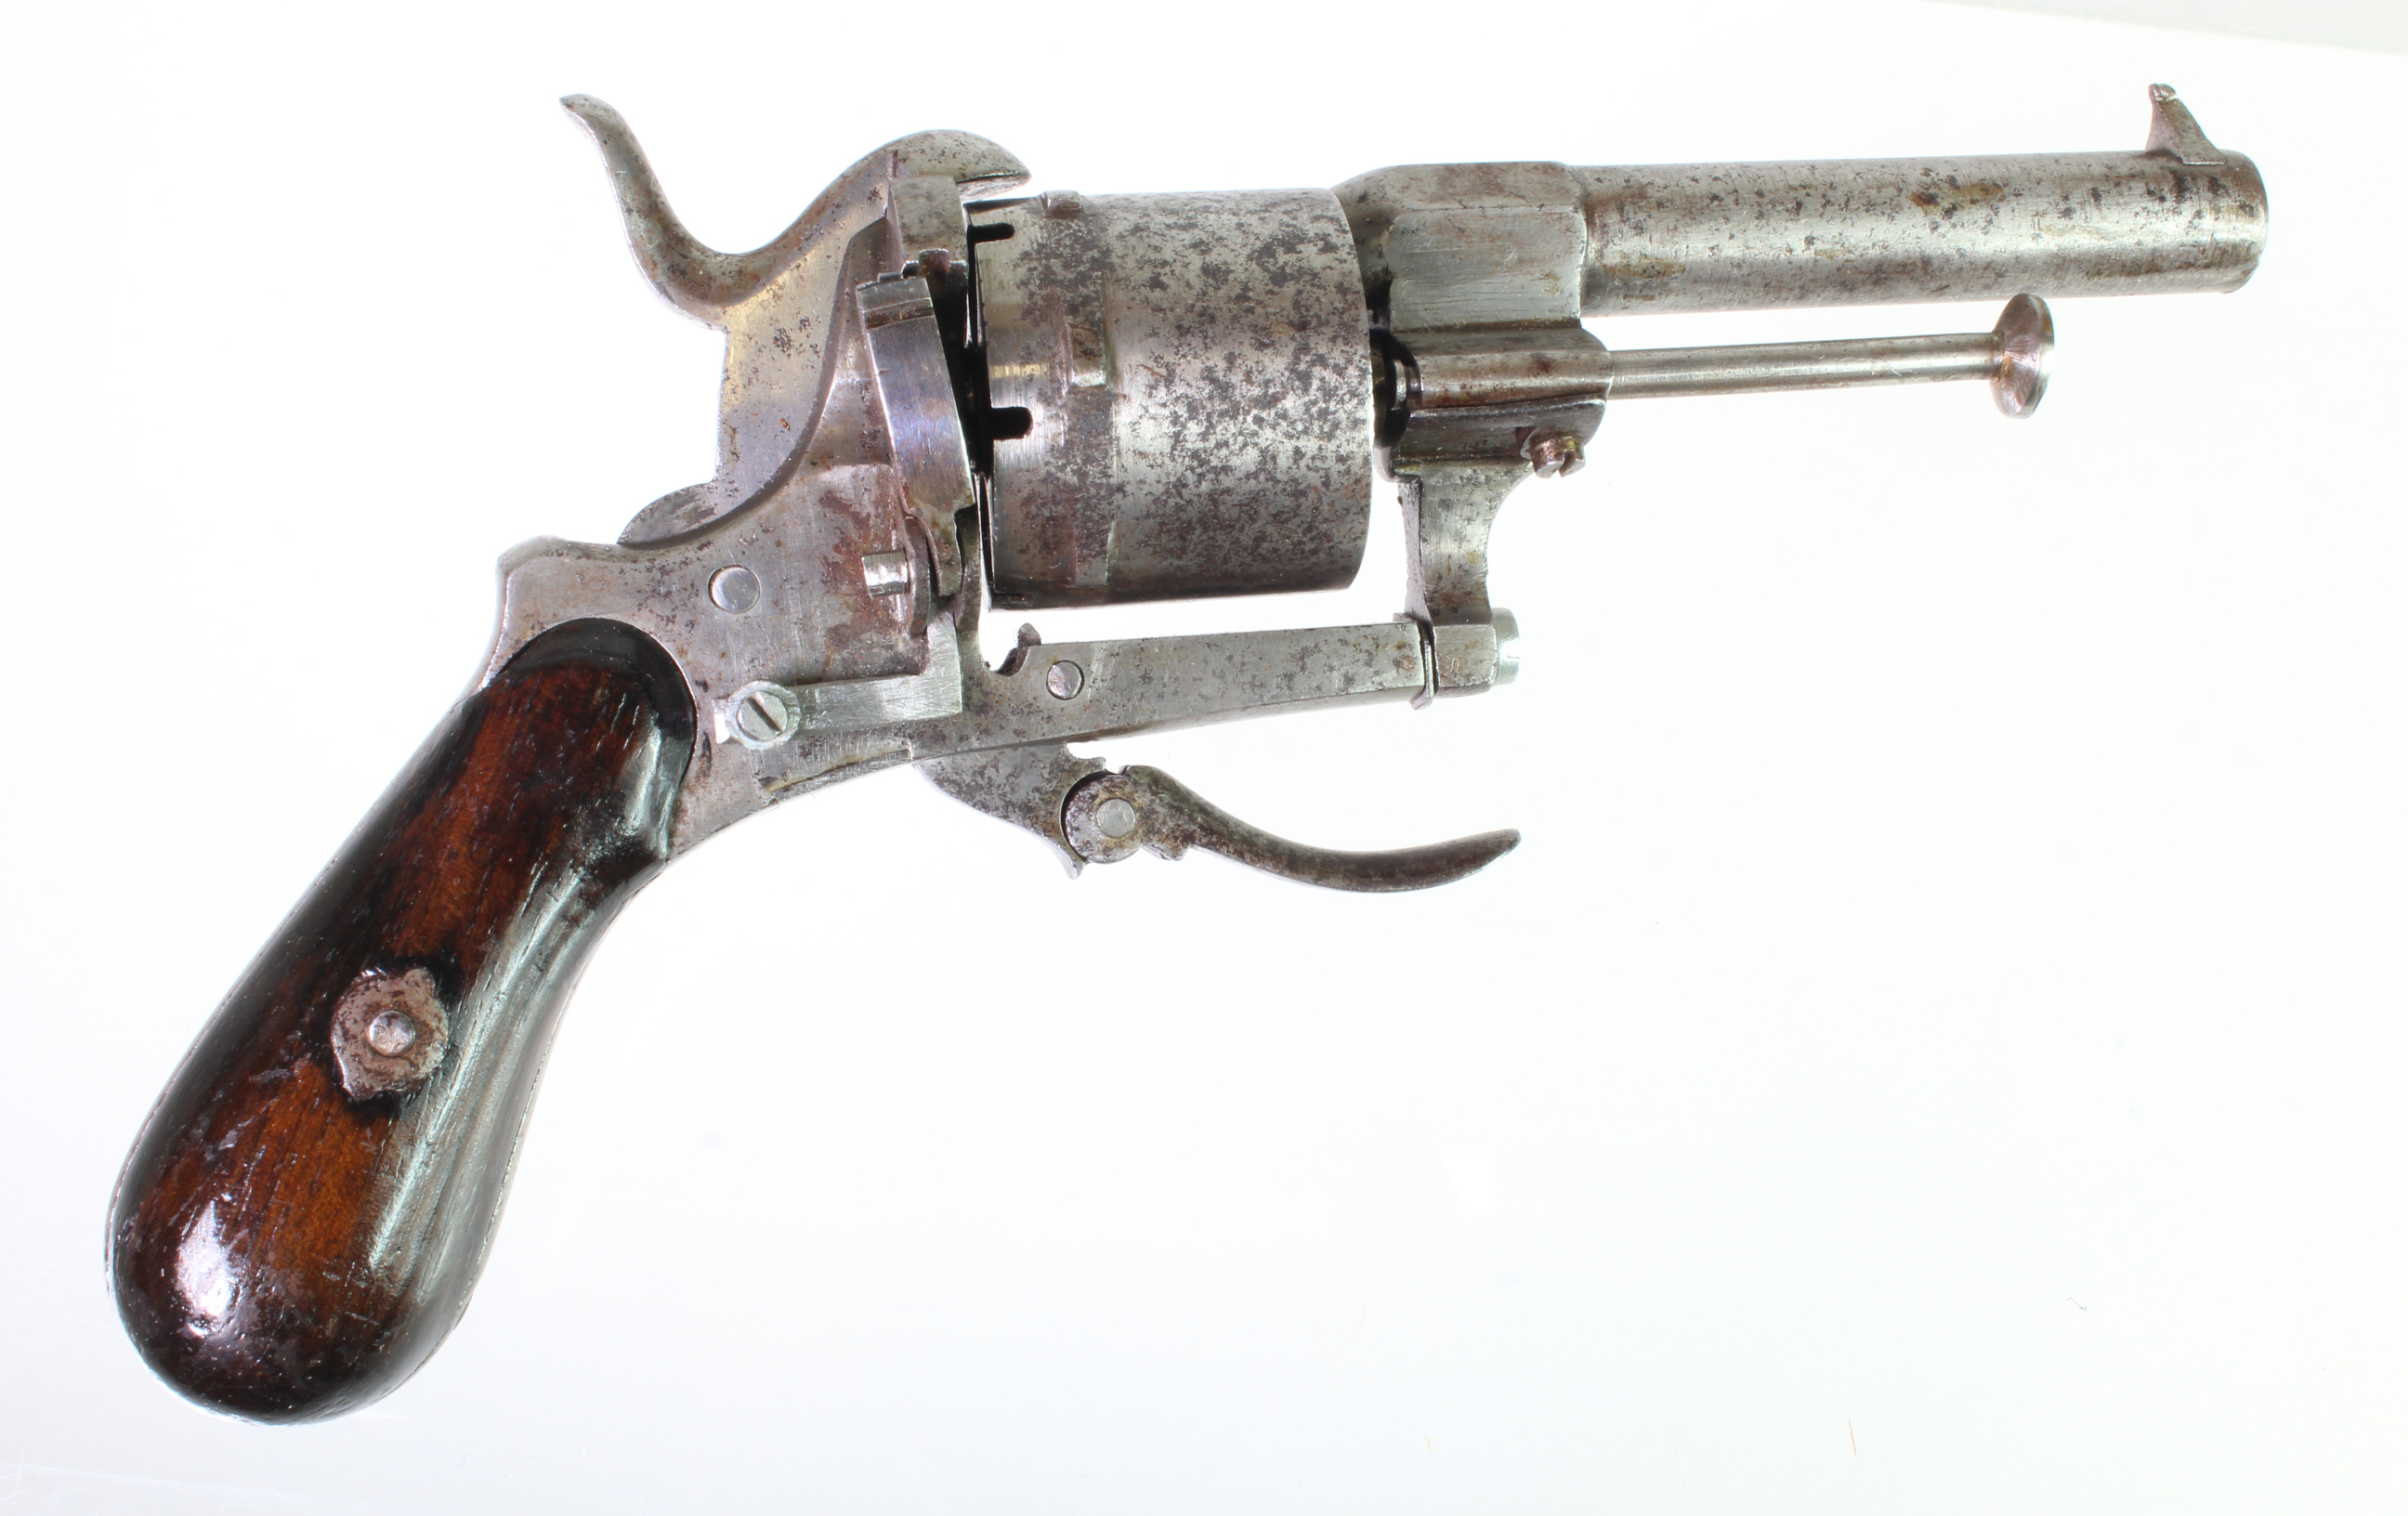 19th Century Belgium pin fire pocket revolver nice gun all complete and in working condition.